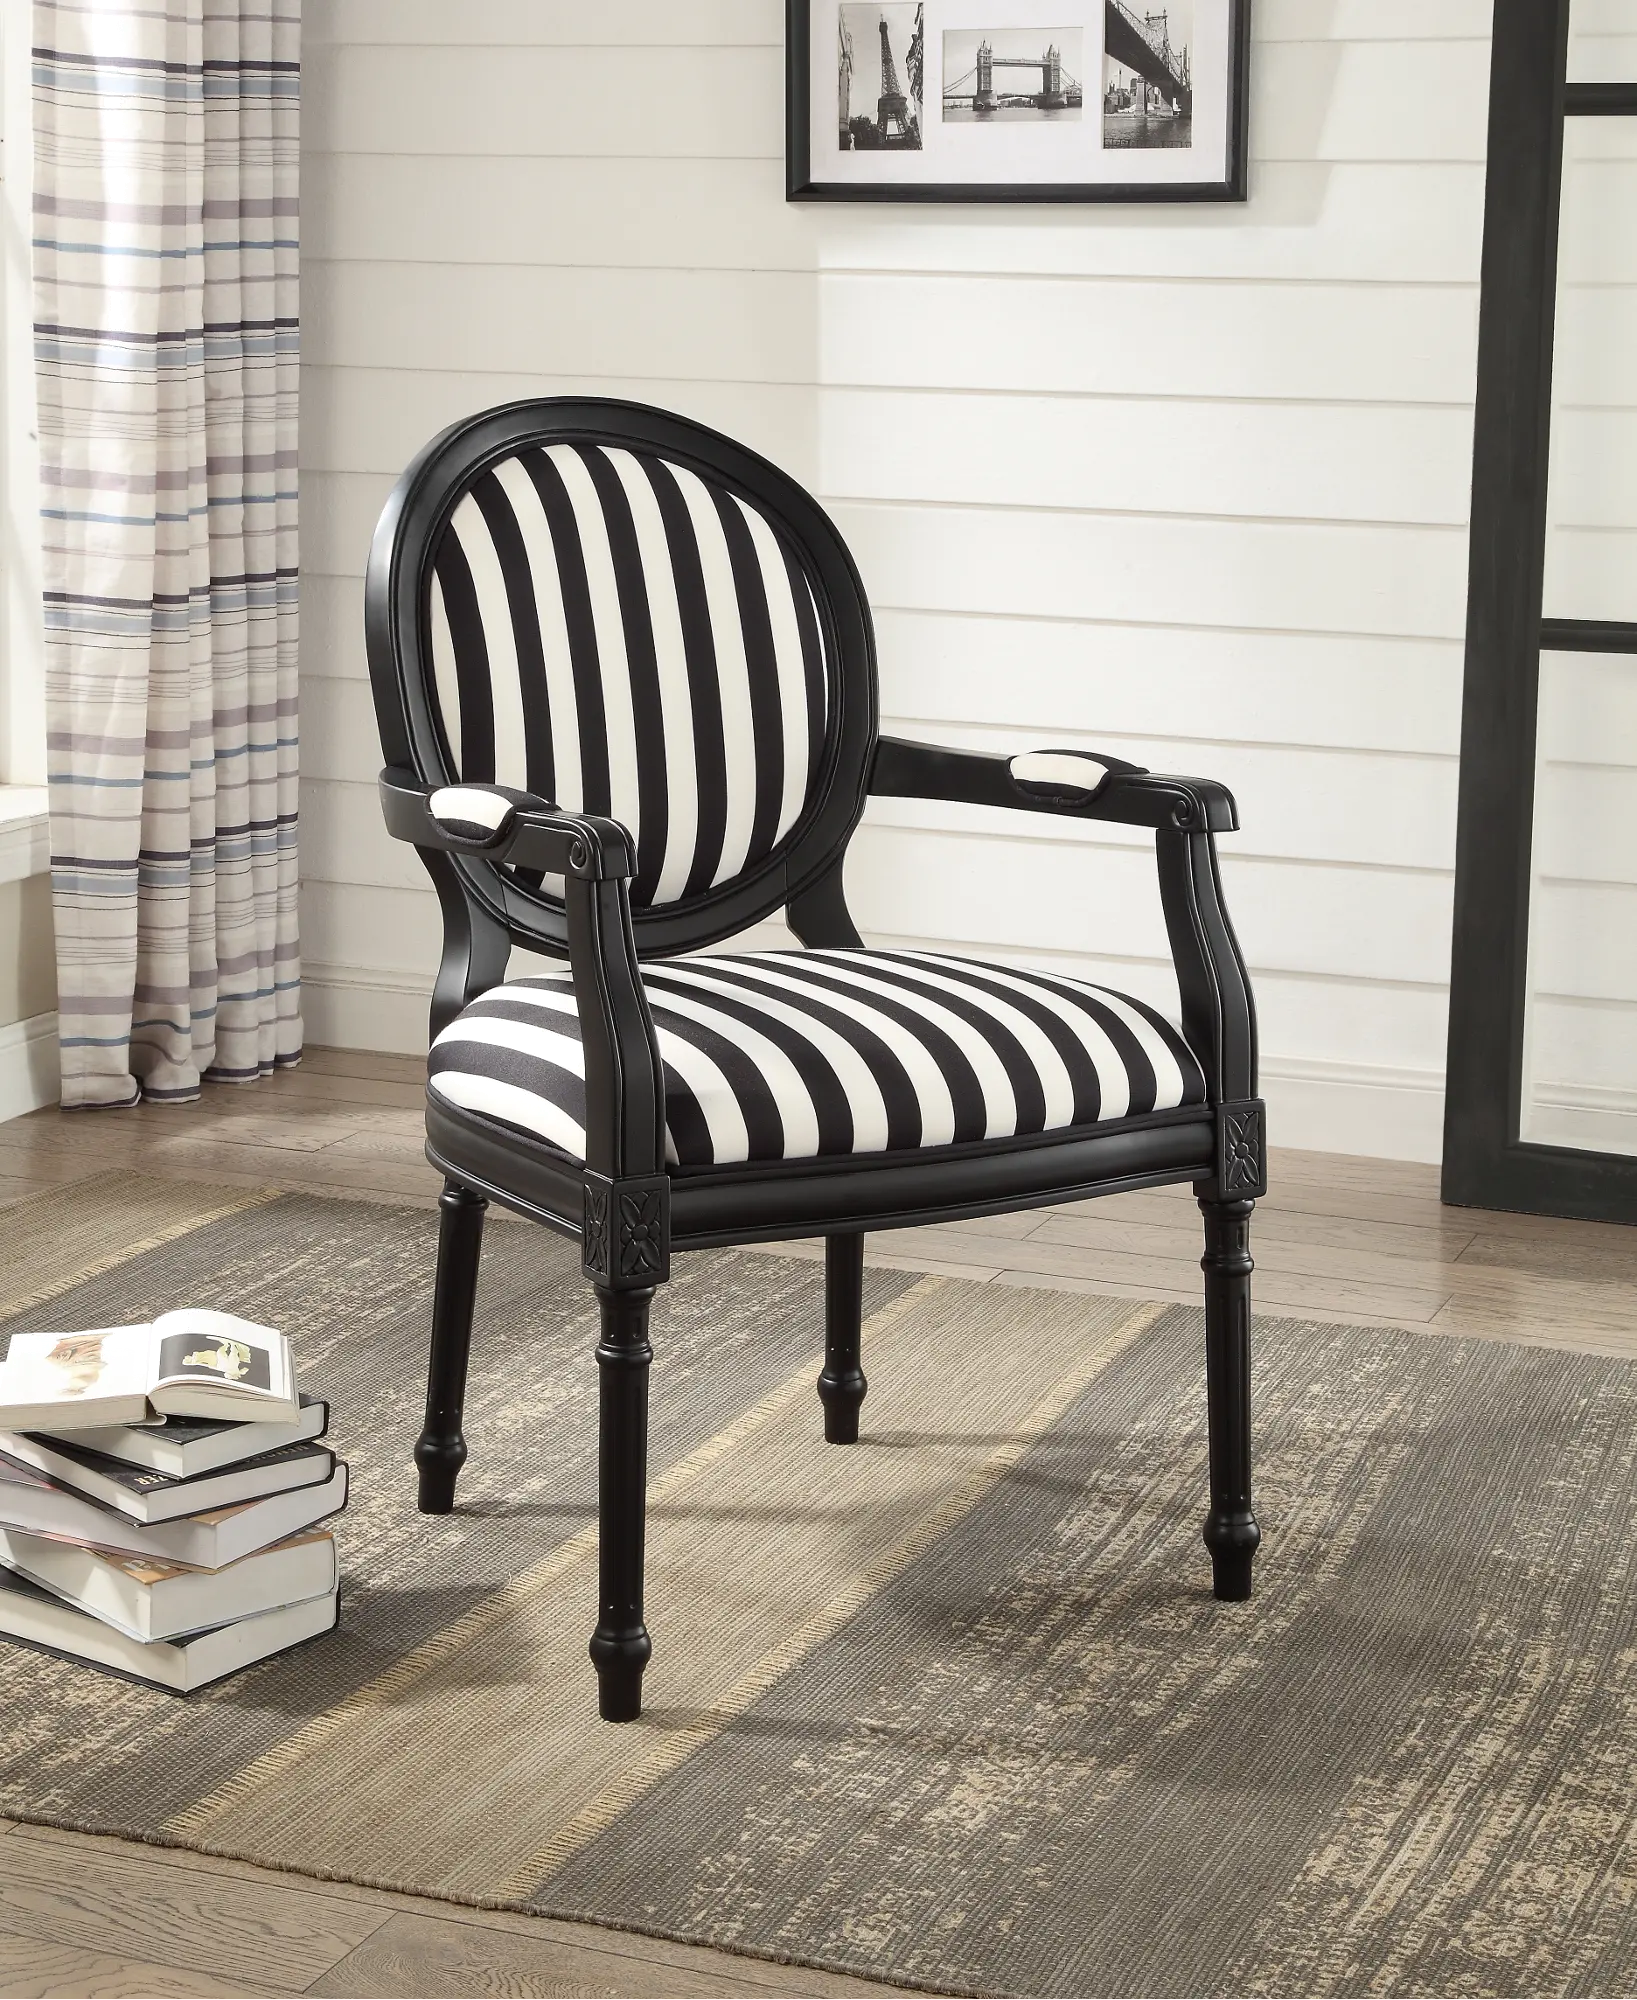 Champion Black and White Accent Chair